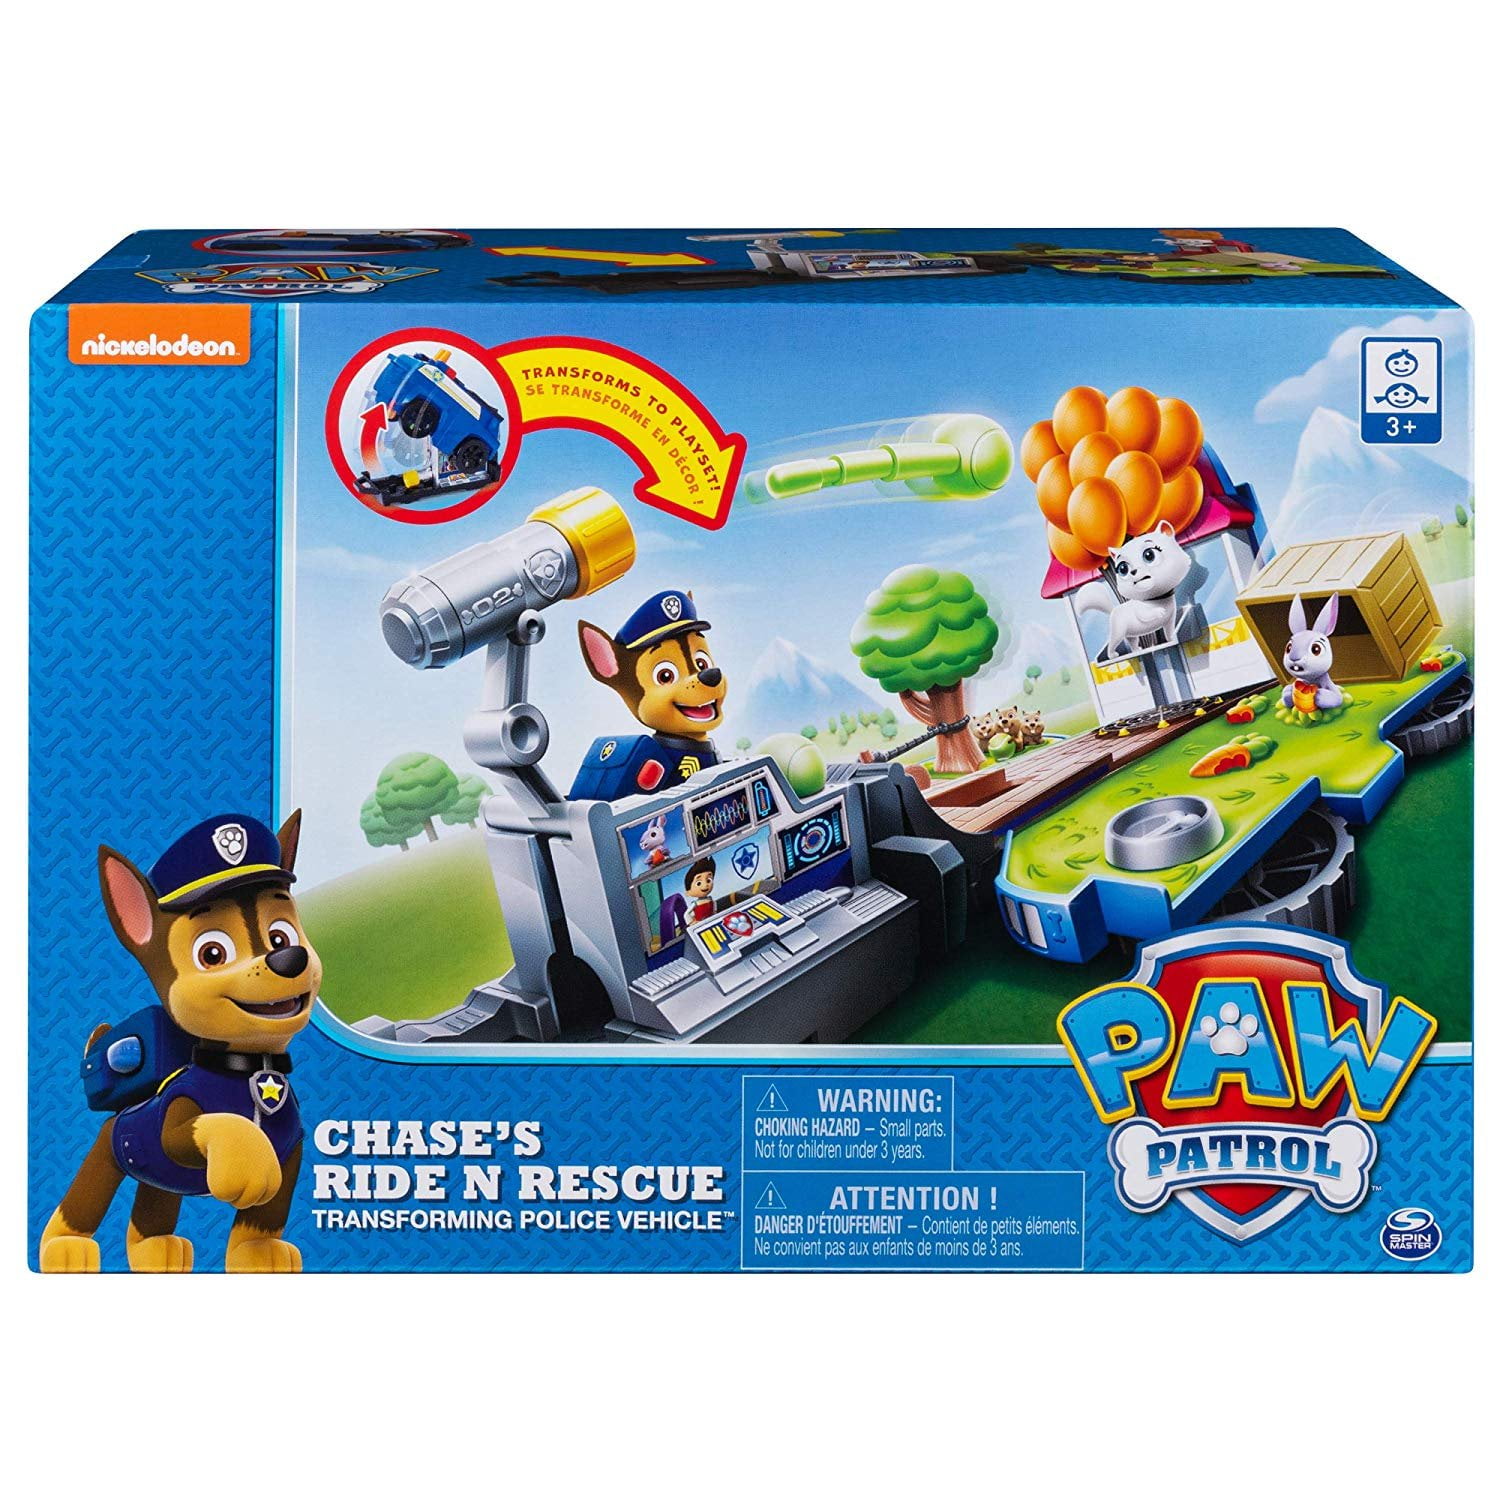 Paw Patrol Chase's Ride ‘N’ Rescue Transforming 2-in-1 Play set & Fire Truck NEW